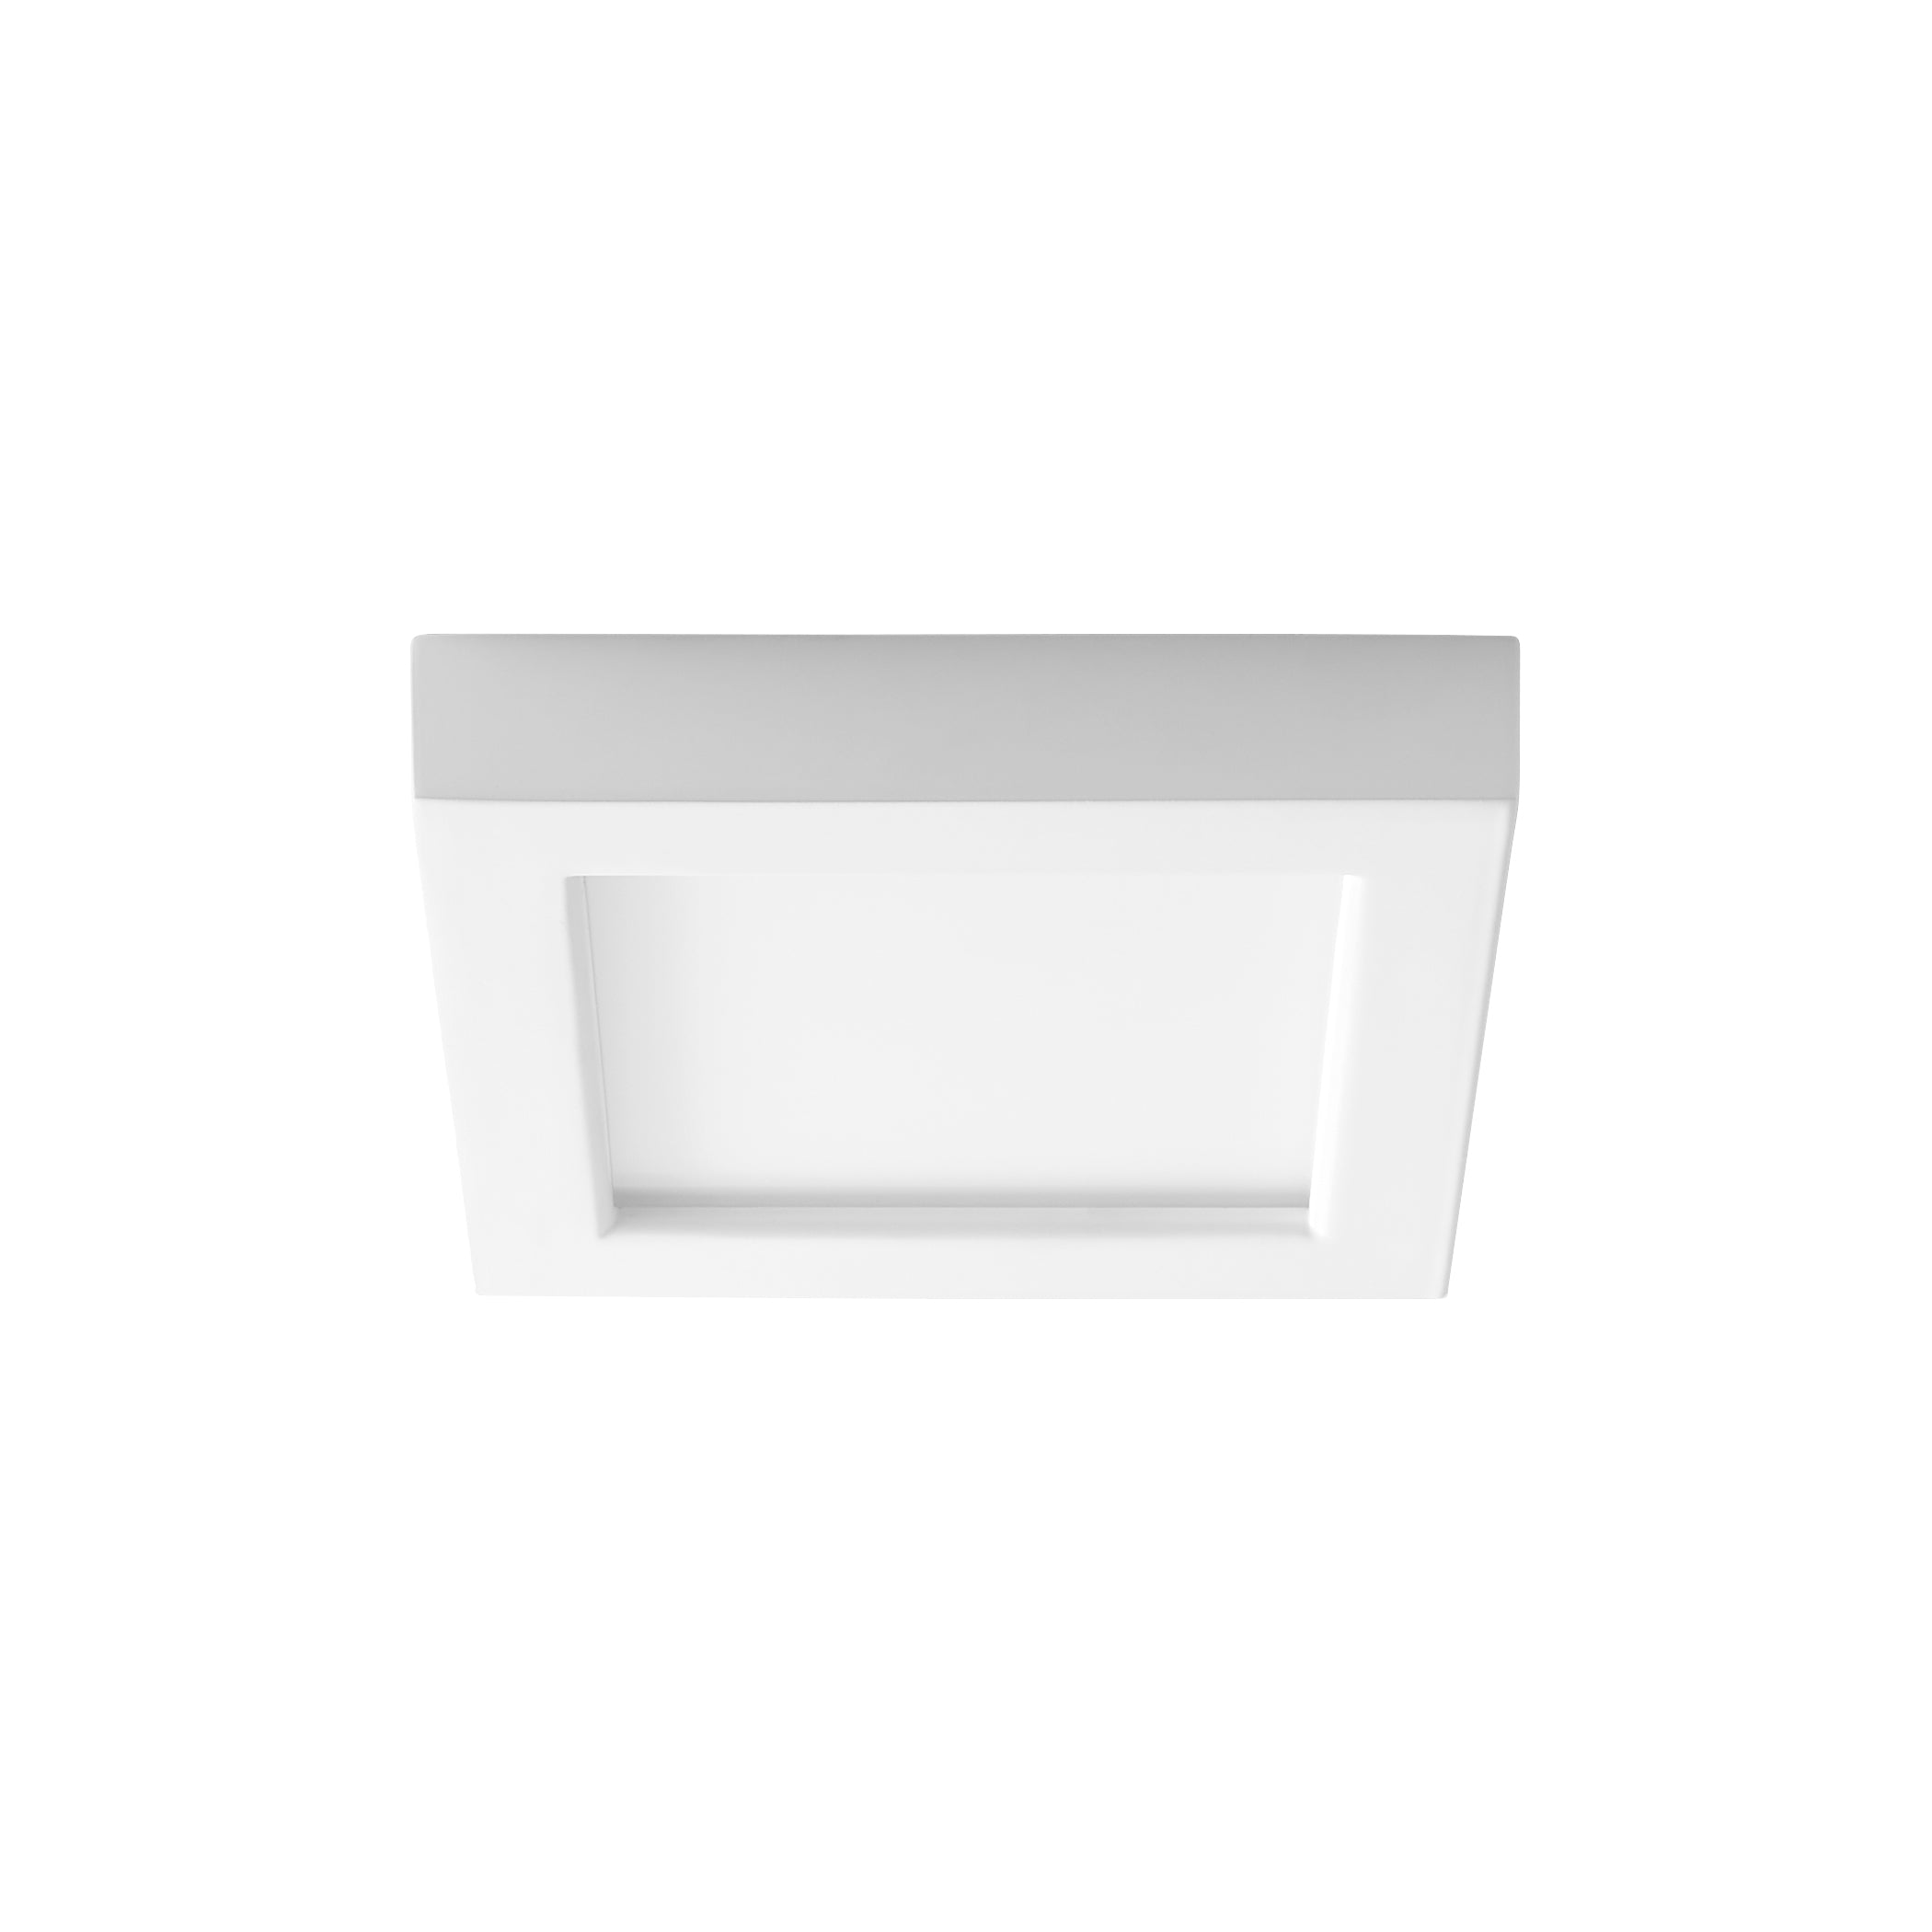 Oxygen Altair 3-332-6 Ceiling Mounts - White